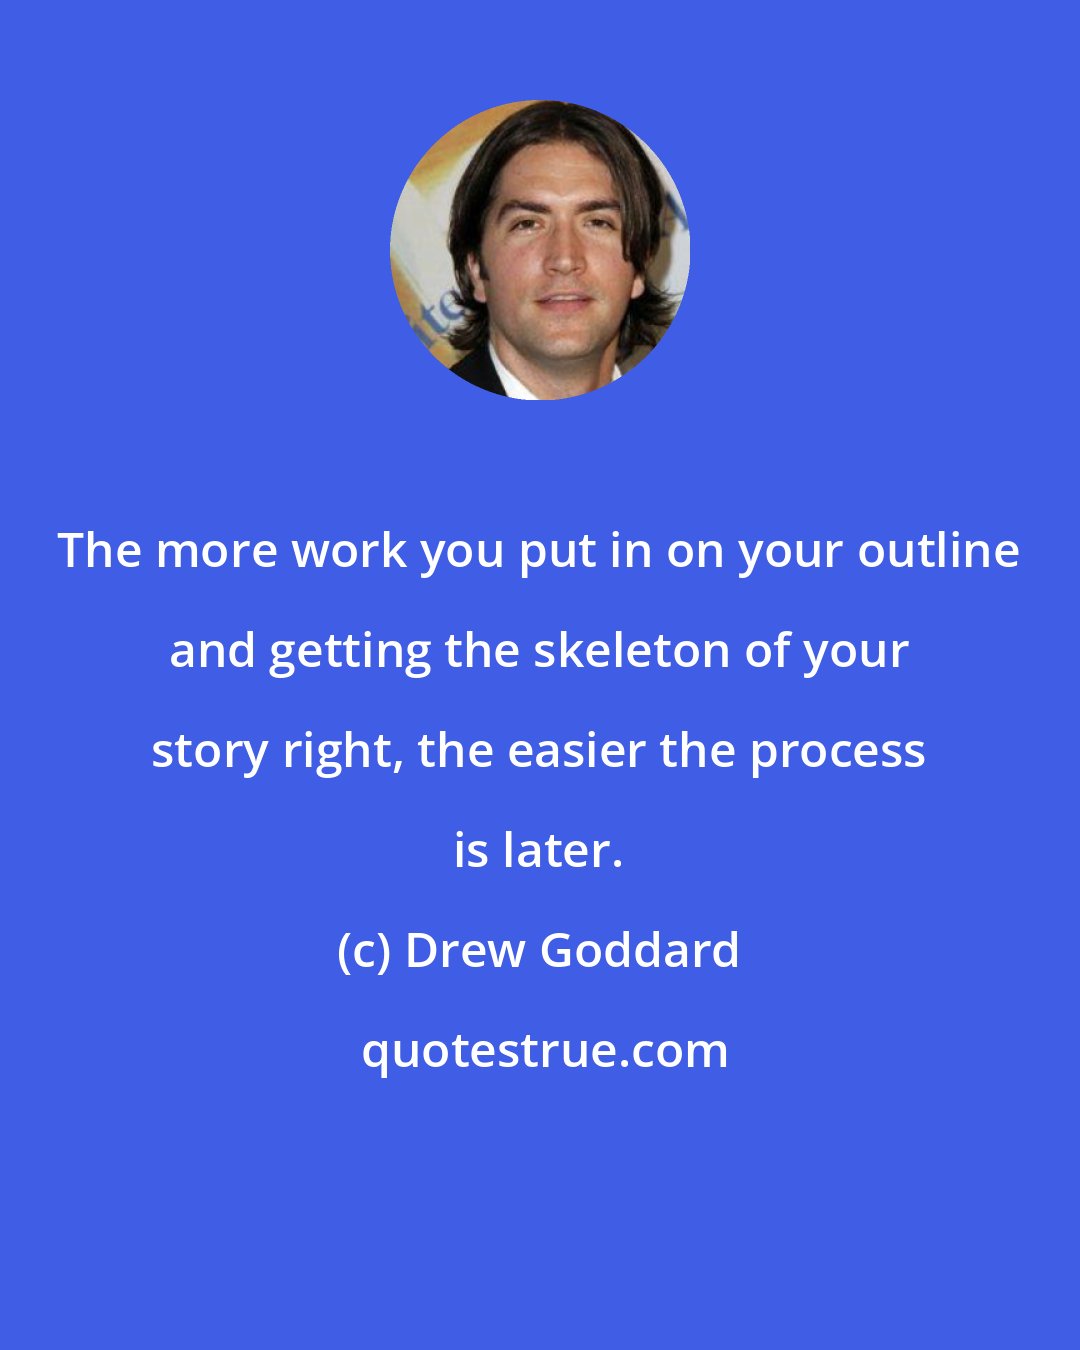 Drew Goddard: The more work you put in on your outline and getting the skeleton of your story right, the easier the process is later.